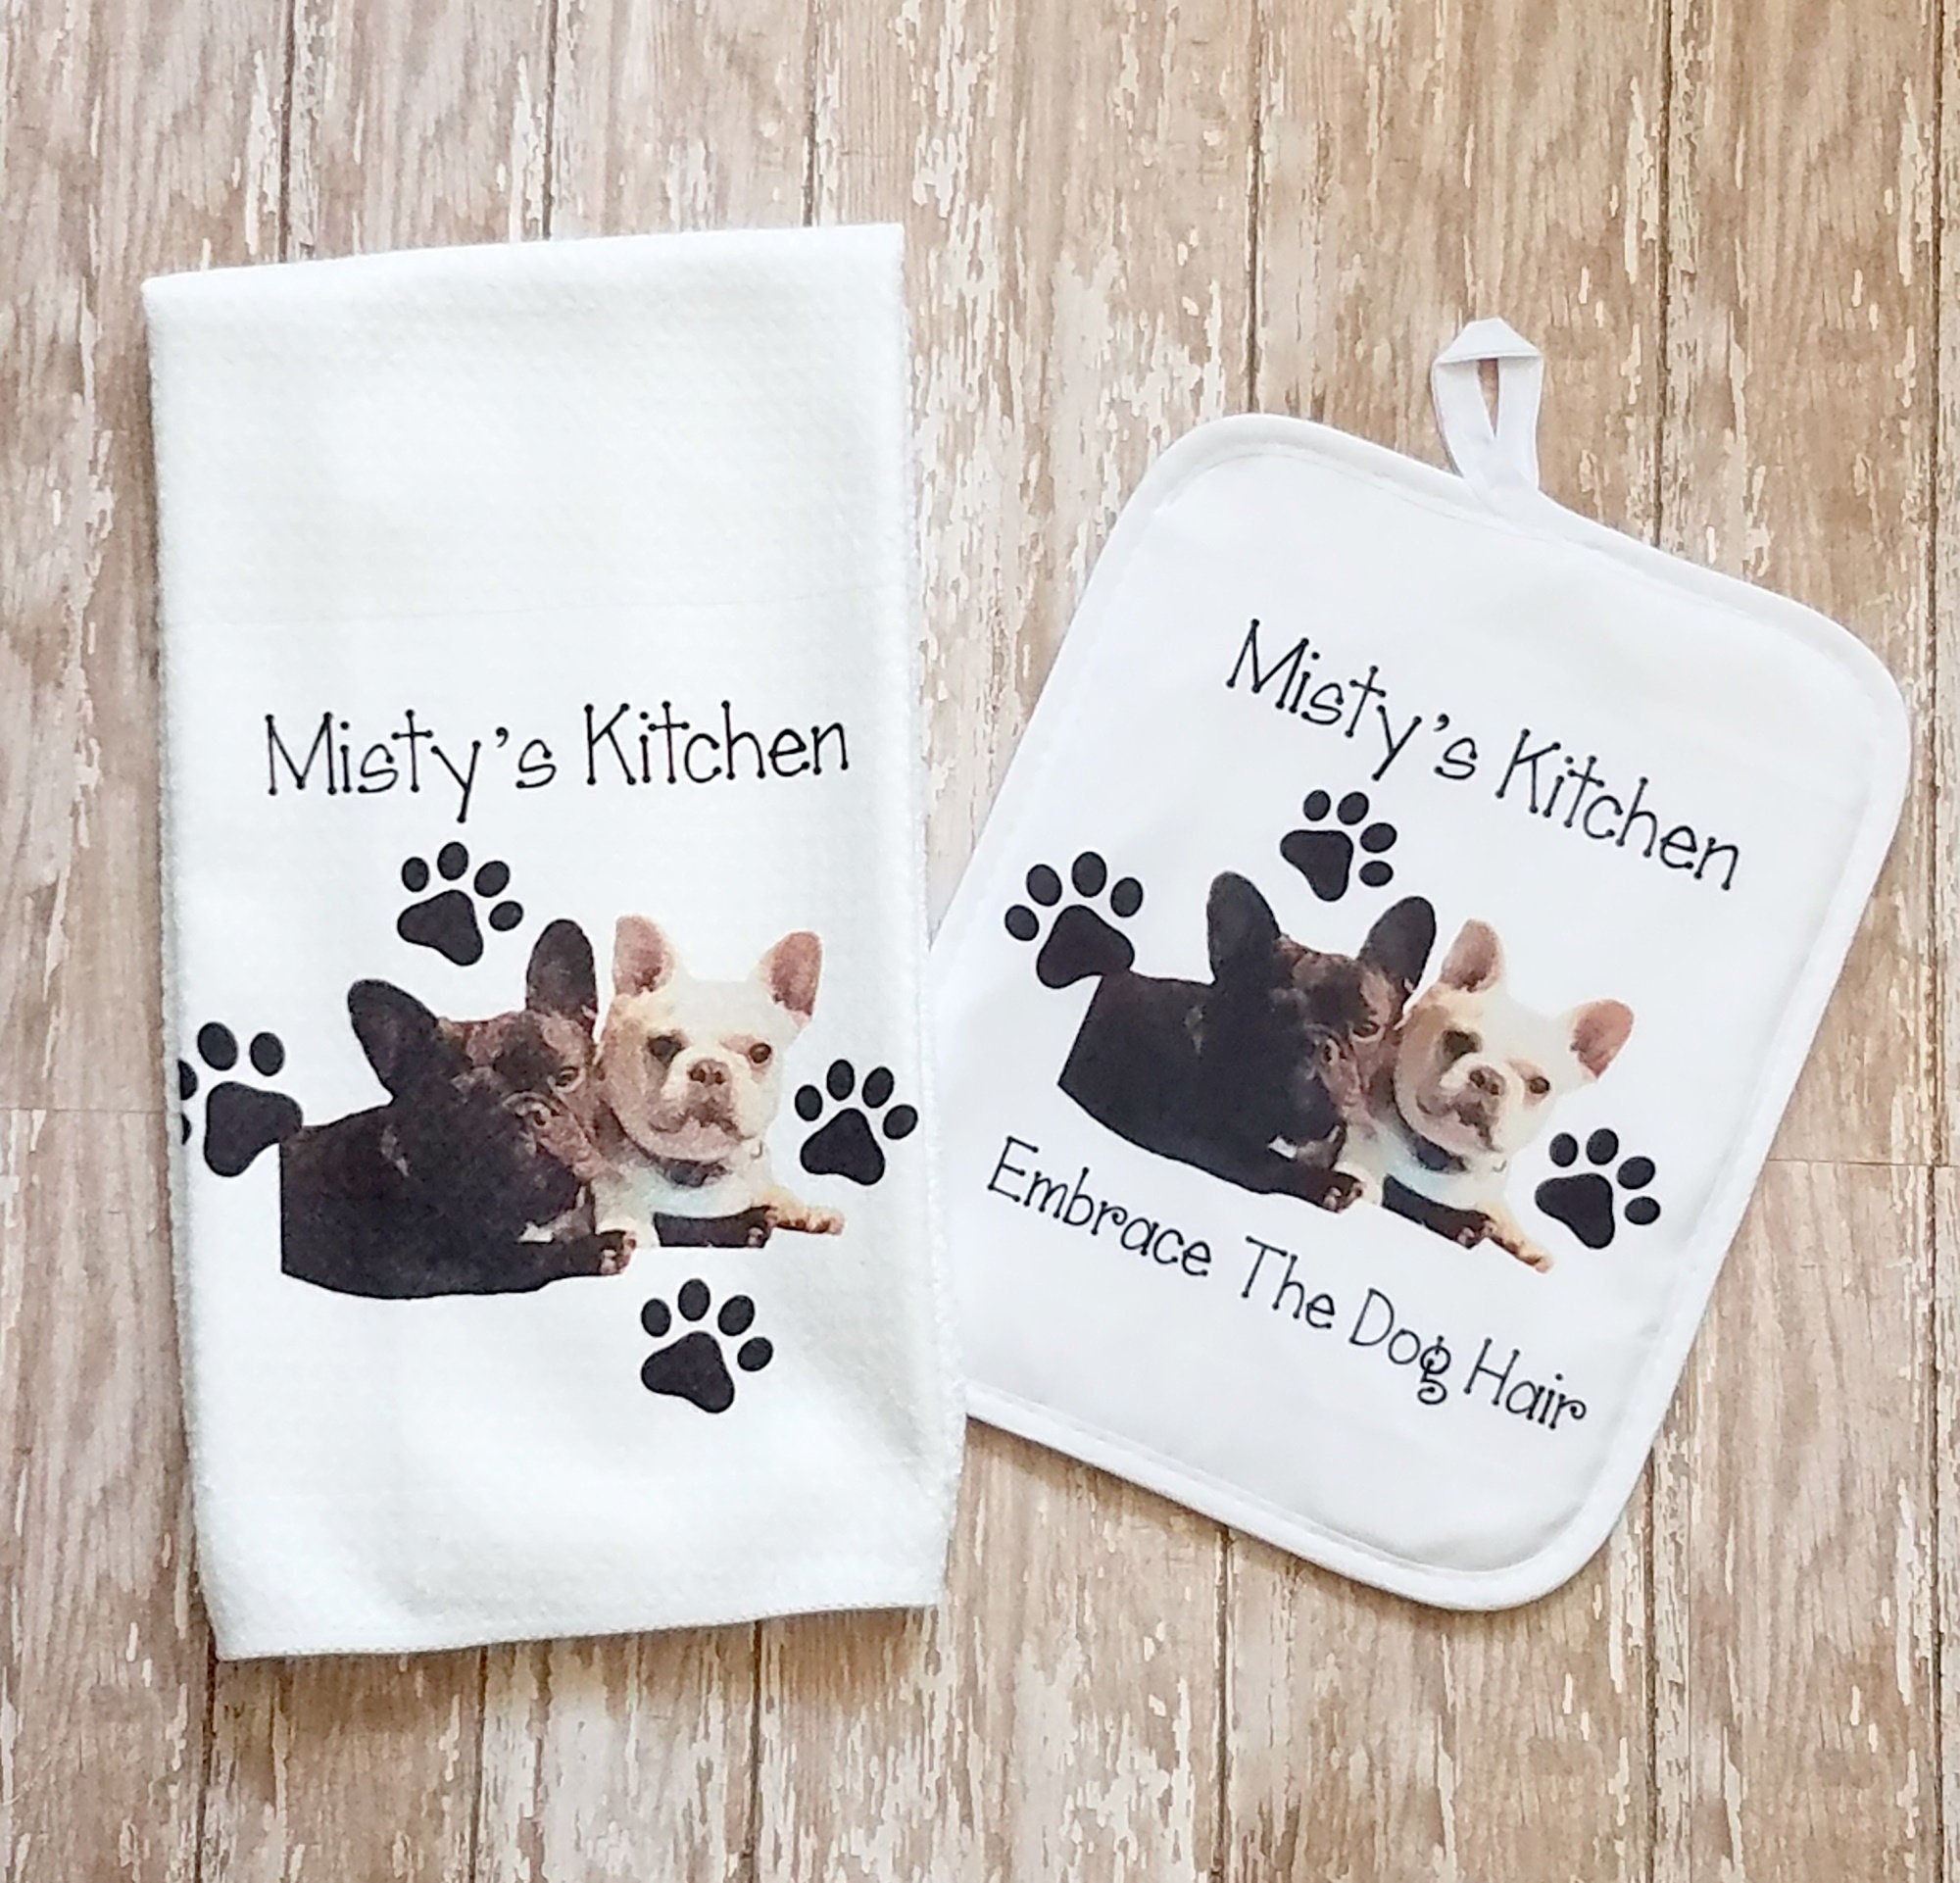 Pot Holders, Cartoon Cute Dog Animal Theme Pot Holder, Heat-Resistant Hot  Pockets, Pot Holders for Kitchen, Hot Pads for Kitchen, Kitchen Accessories